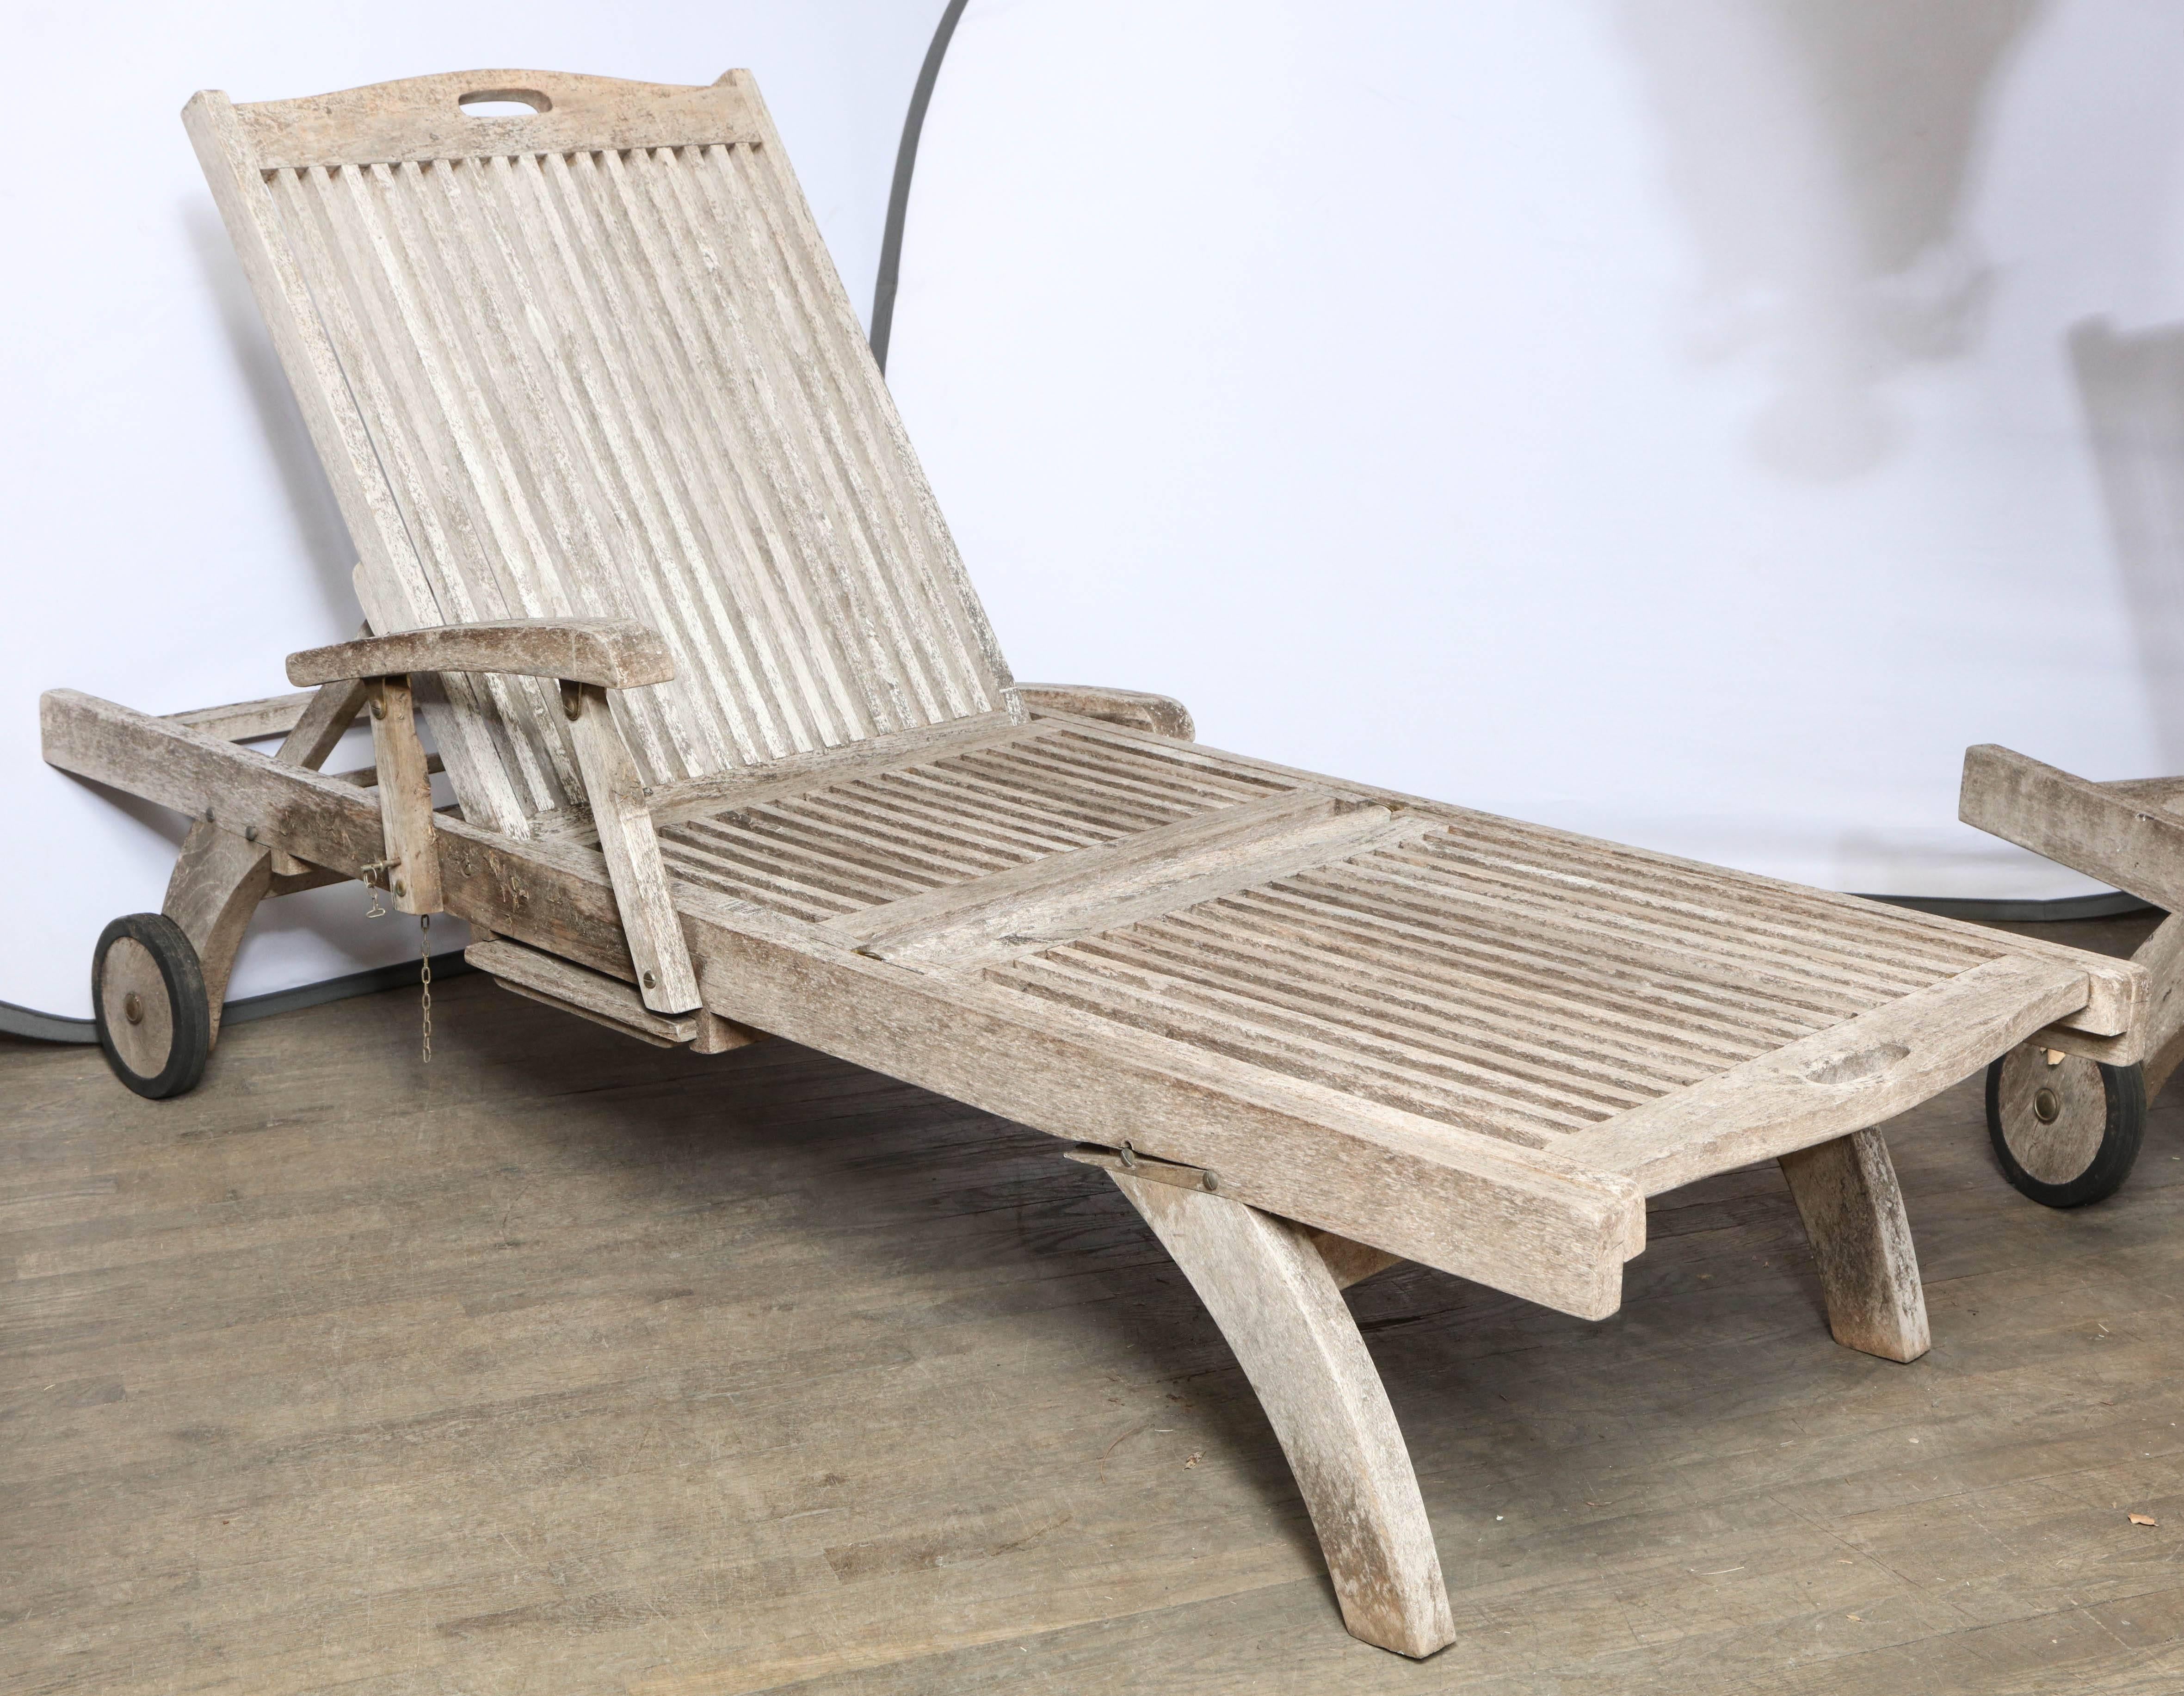 Teak outdoor lounge chaise. Handpicked by Ann-Morris buyers.